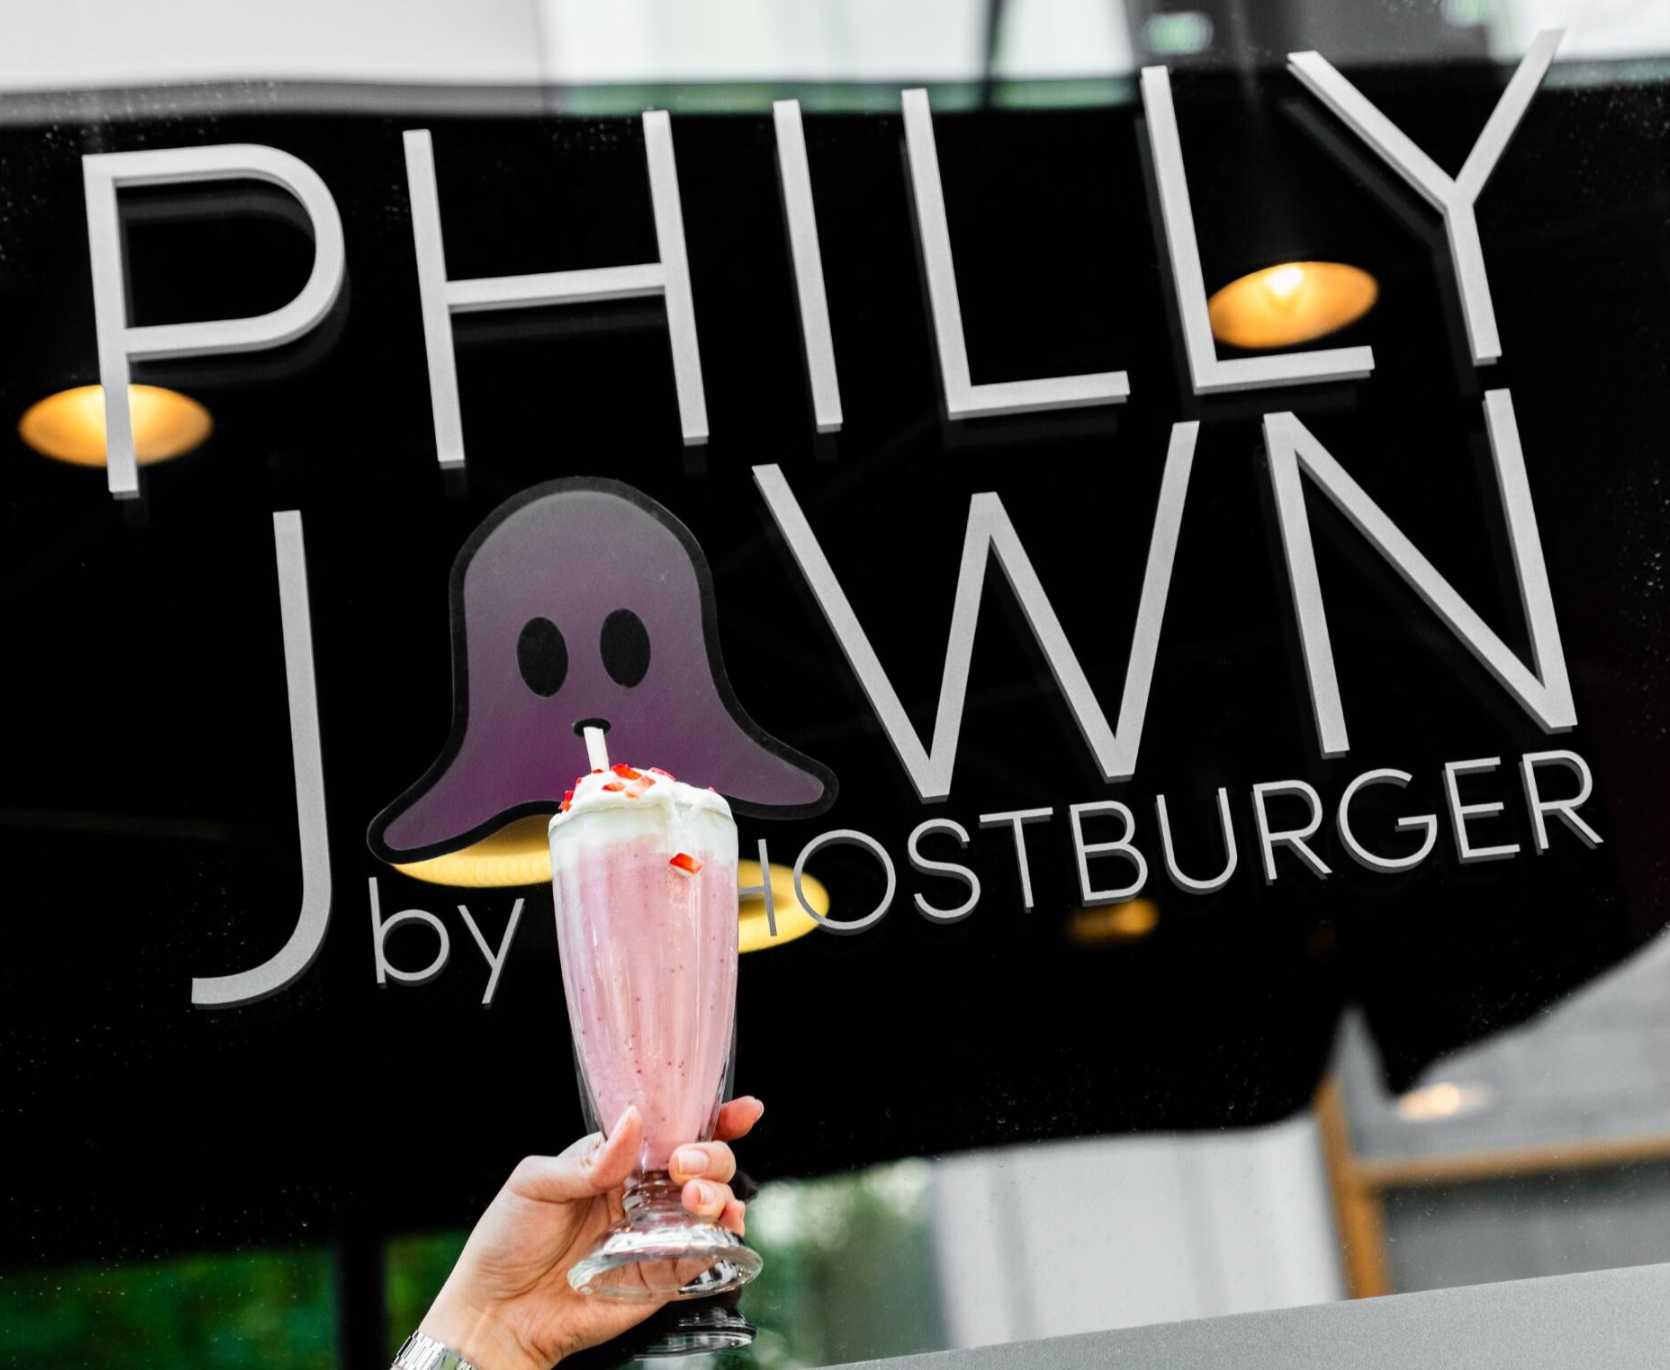 PHILLY JAWN BY GHOSTBURGER